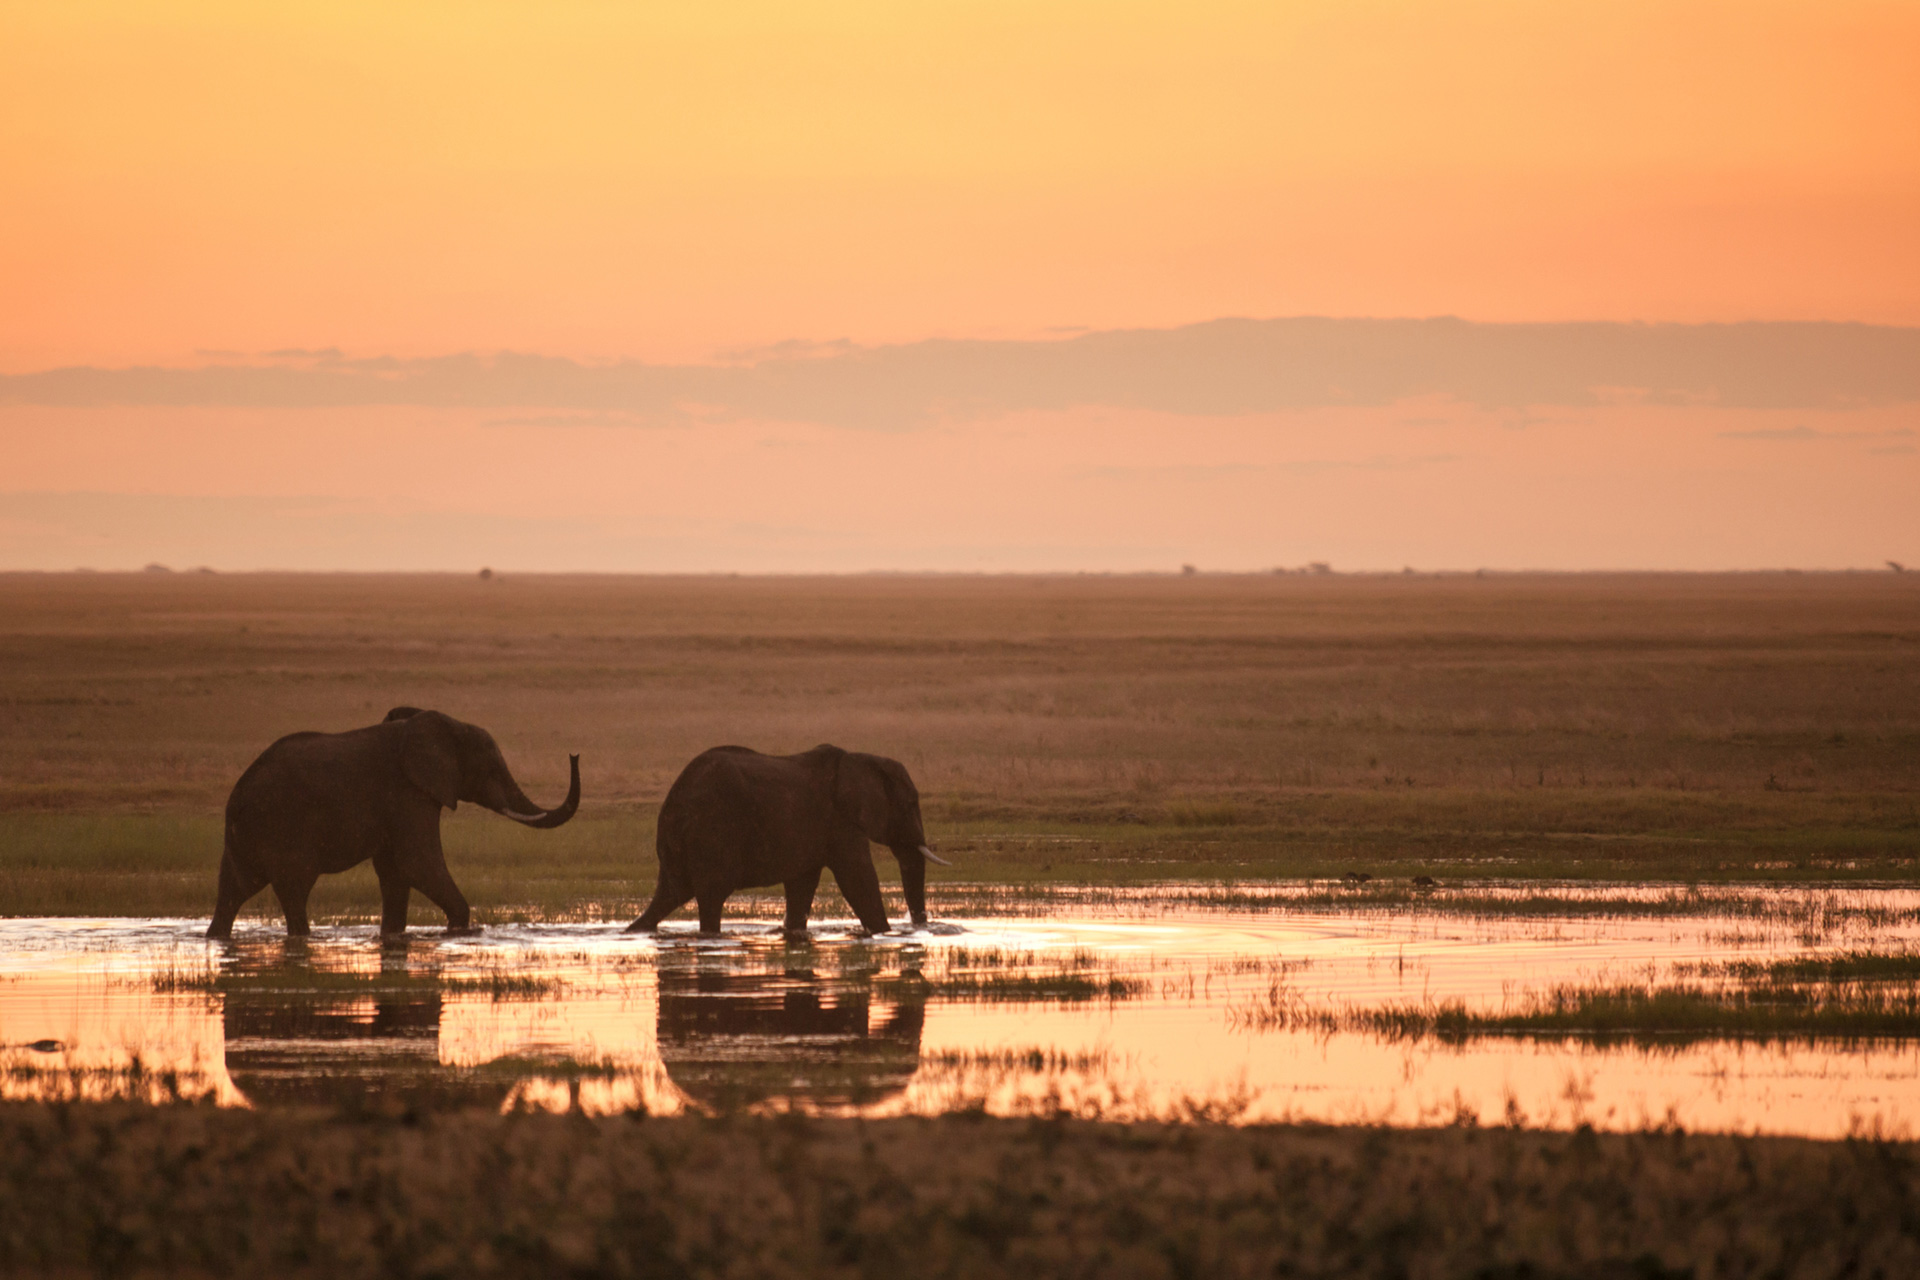 Image of elephants in the sunset